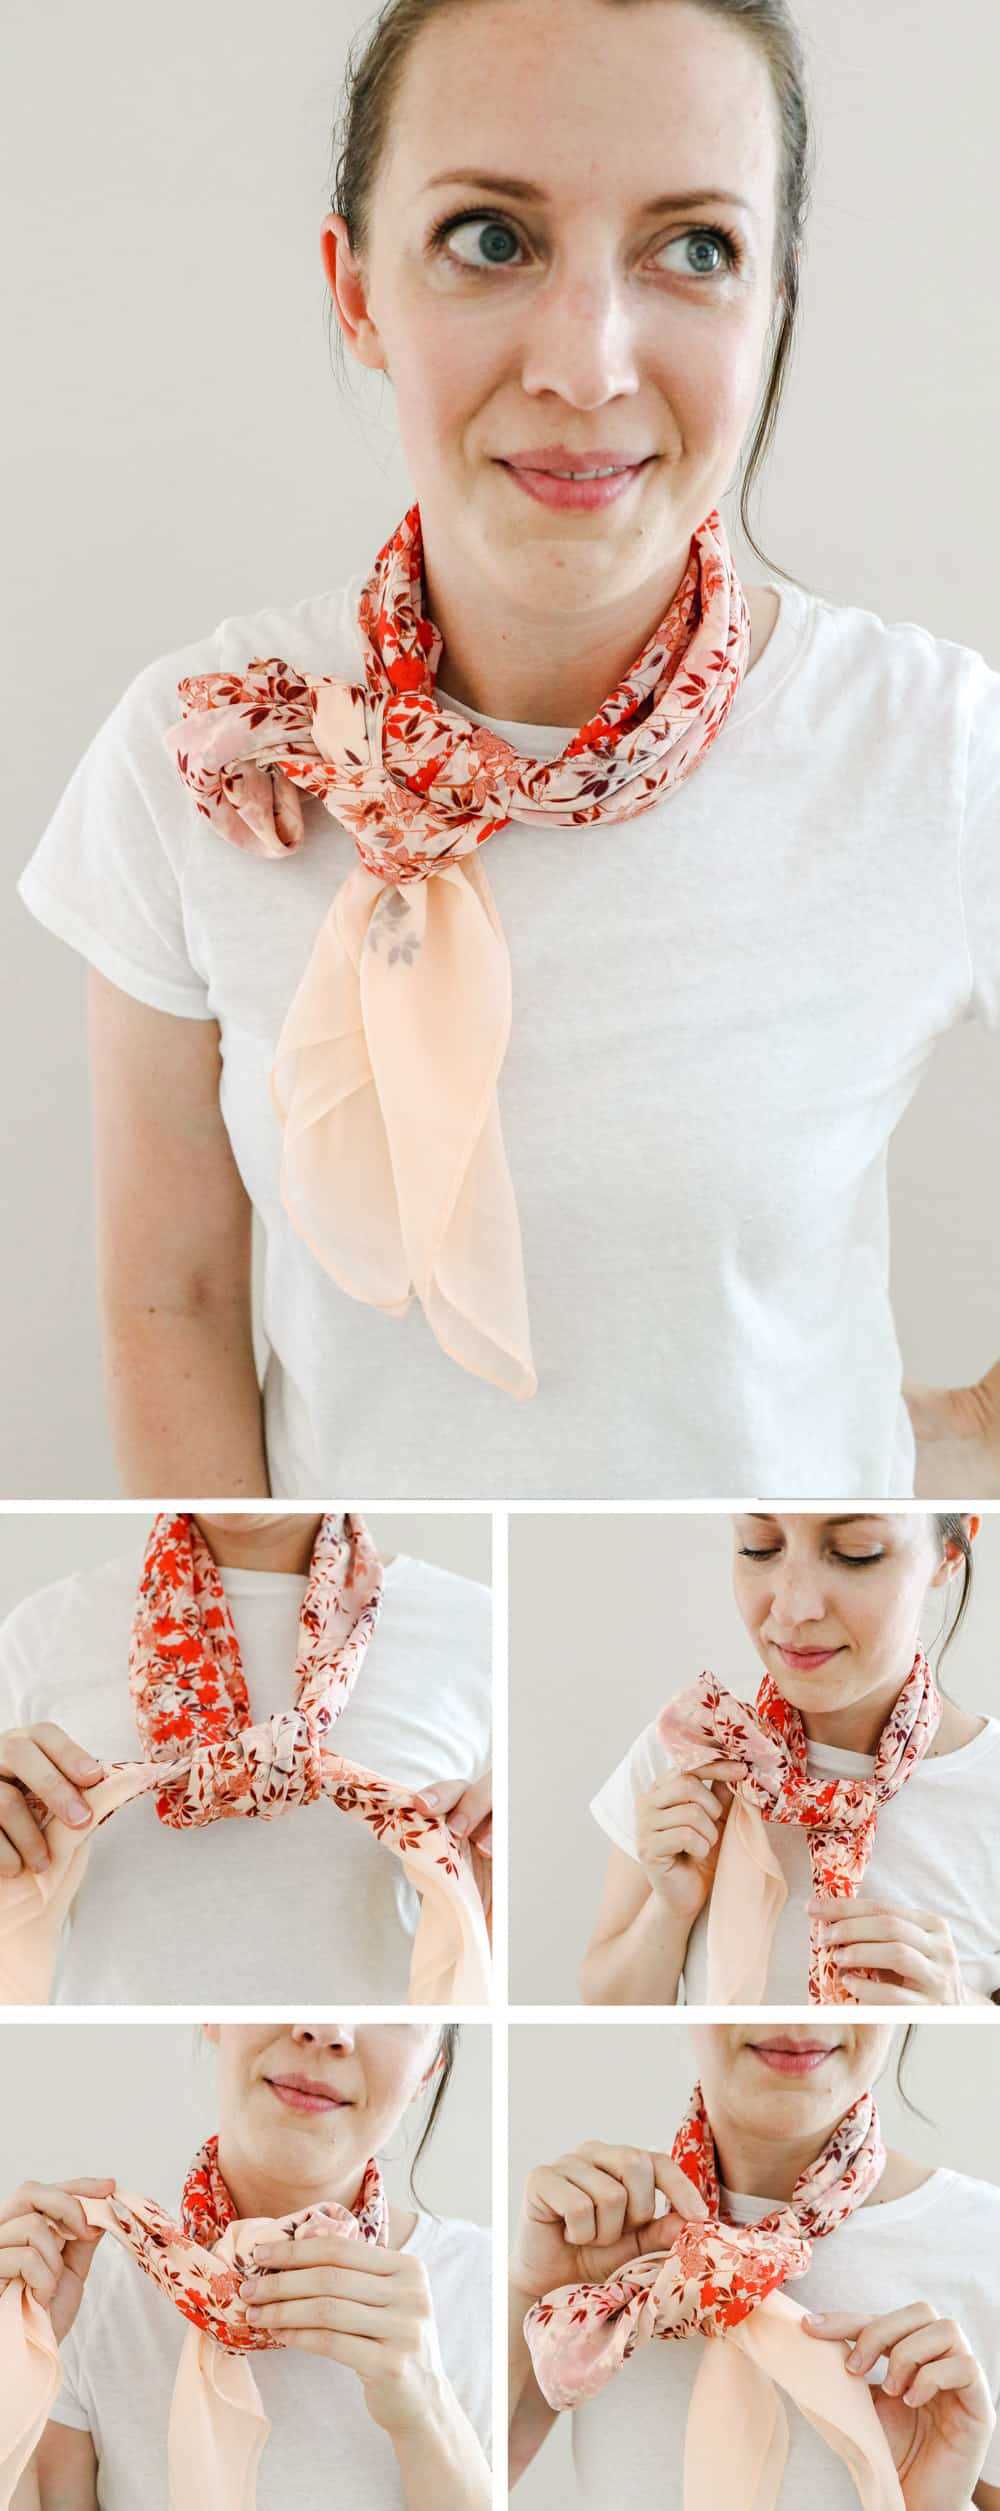 How to wear scarf on neck